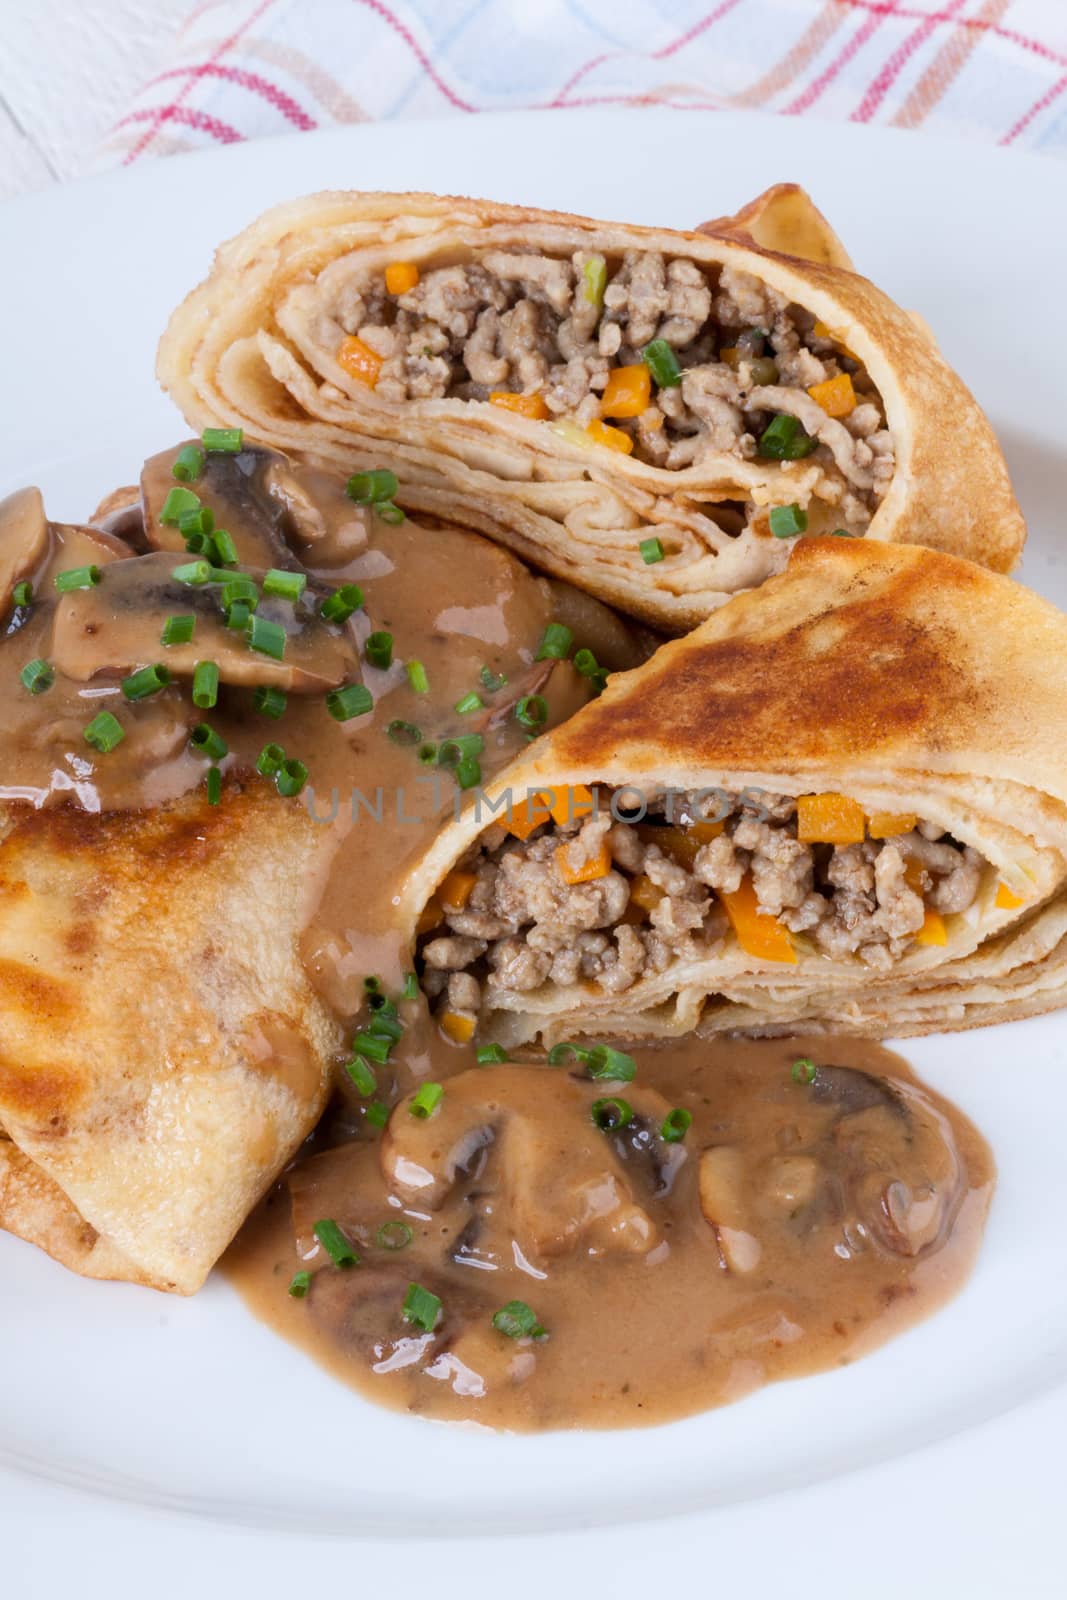 Savory mince pancakes or tortillas cut open to show the ground or minced meat and vegetable filling in a rich tasty gravy